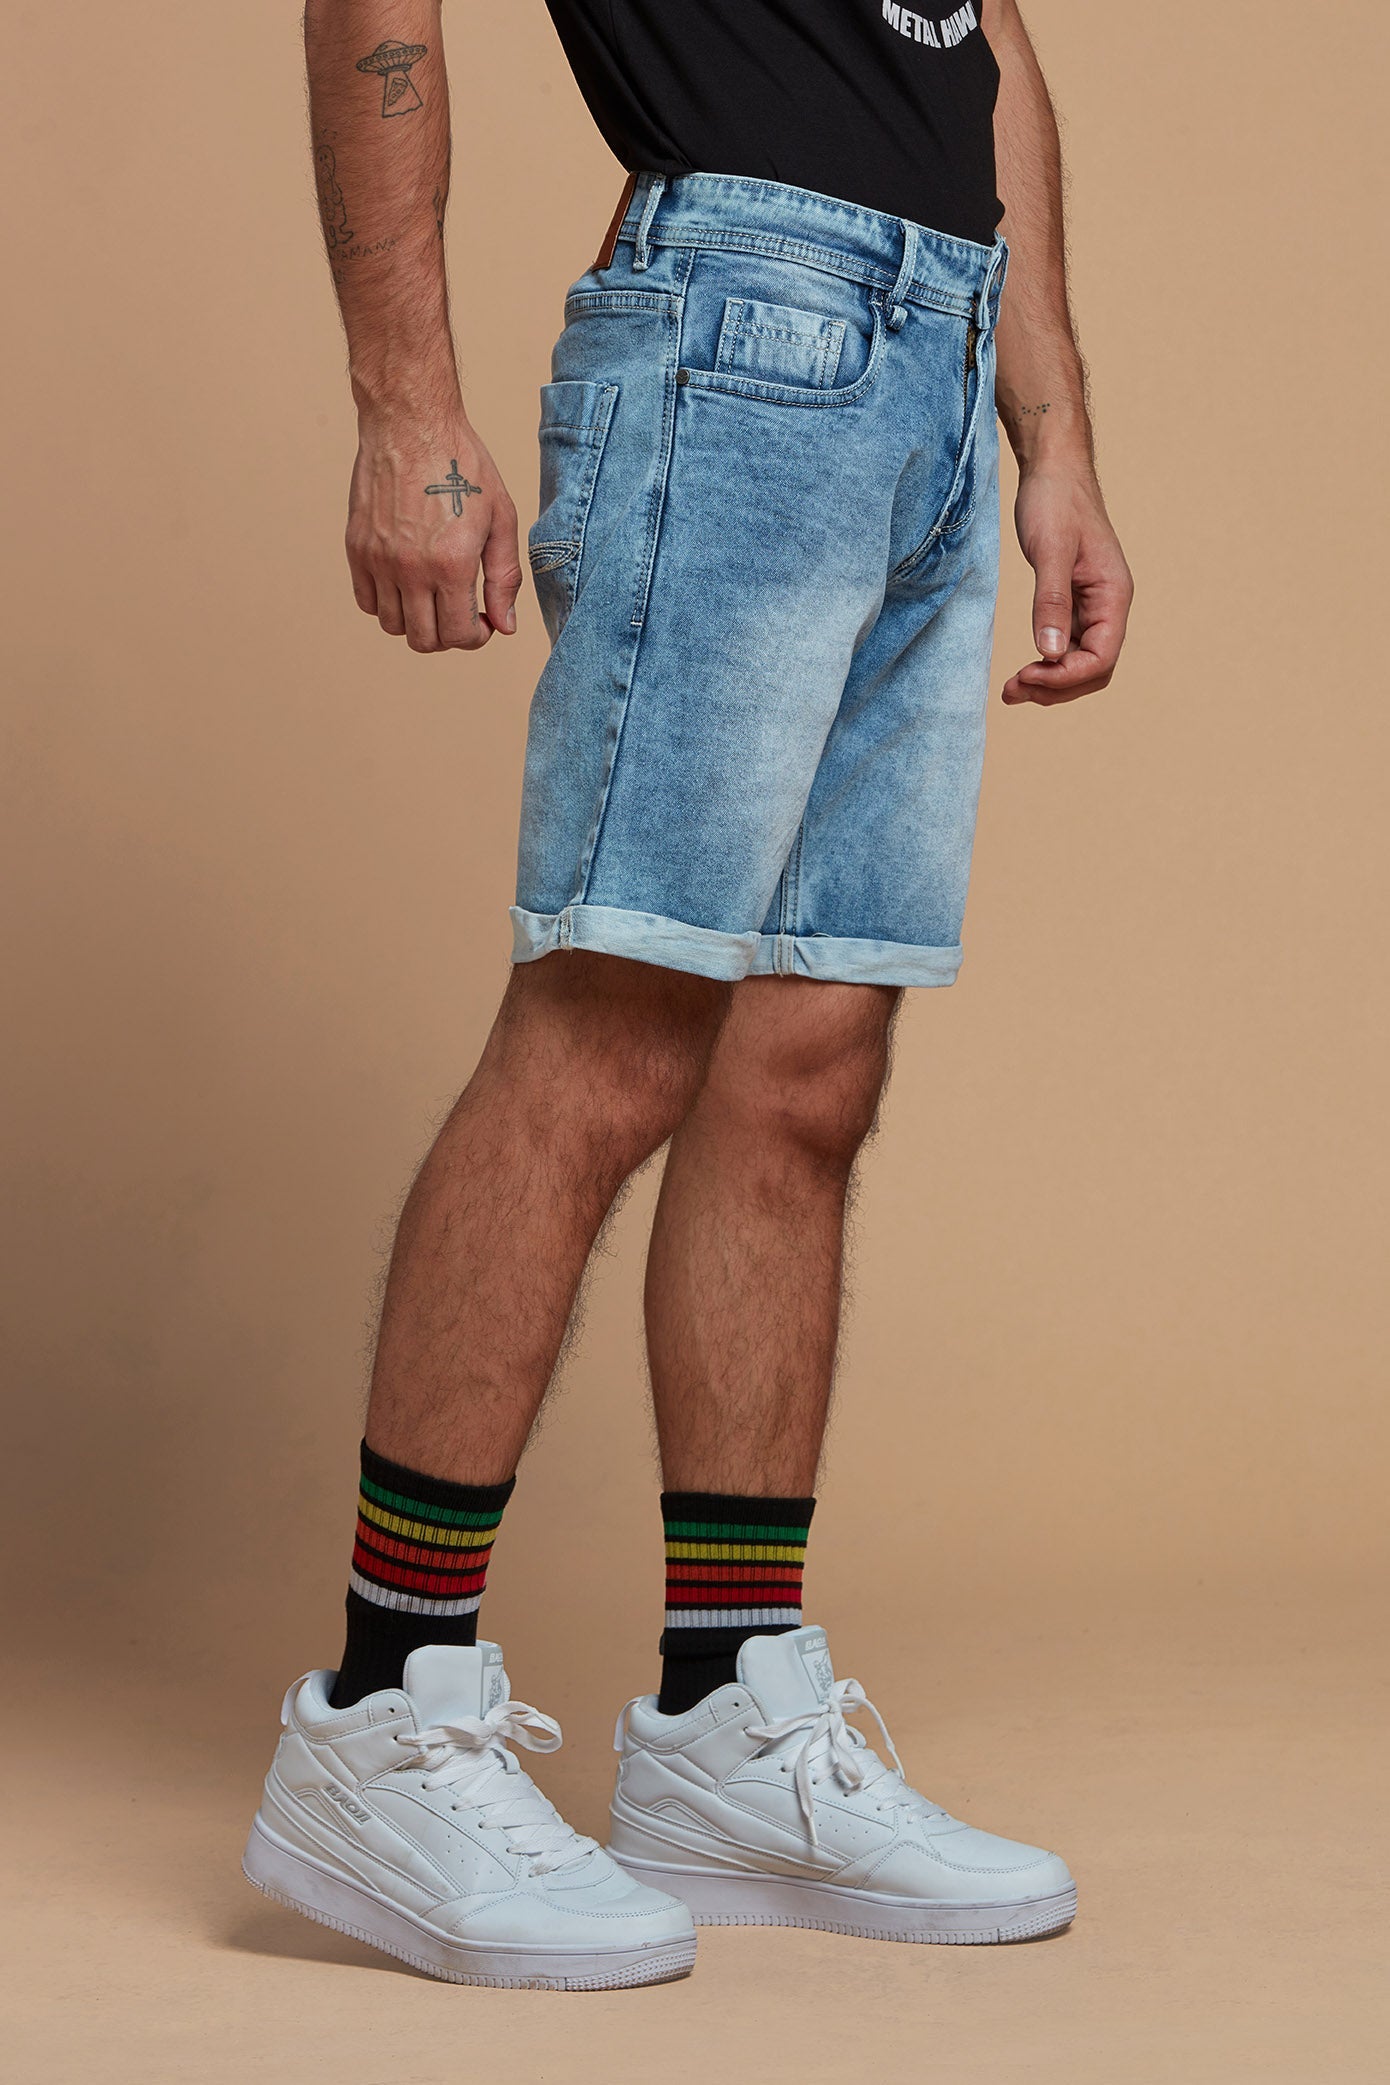 Only & Sons loose fit denim shorts in black wash with rips | ASOS